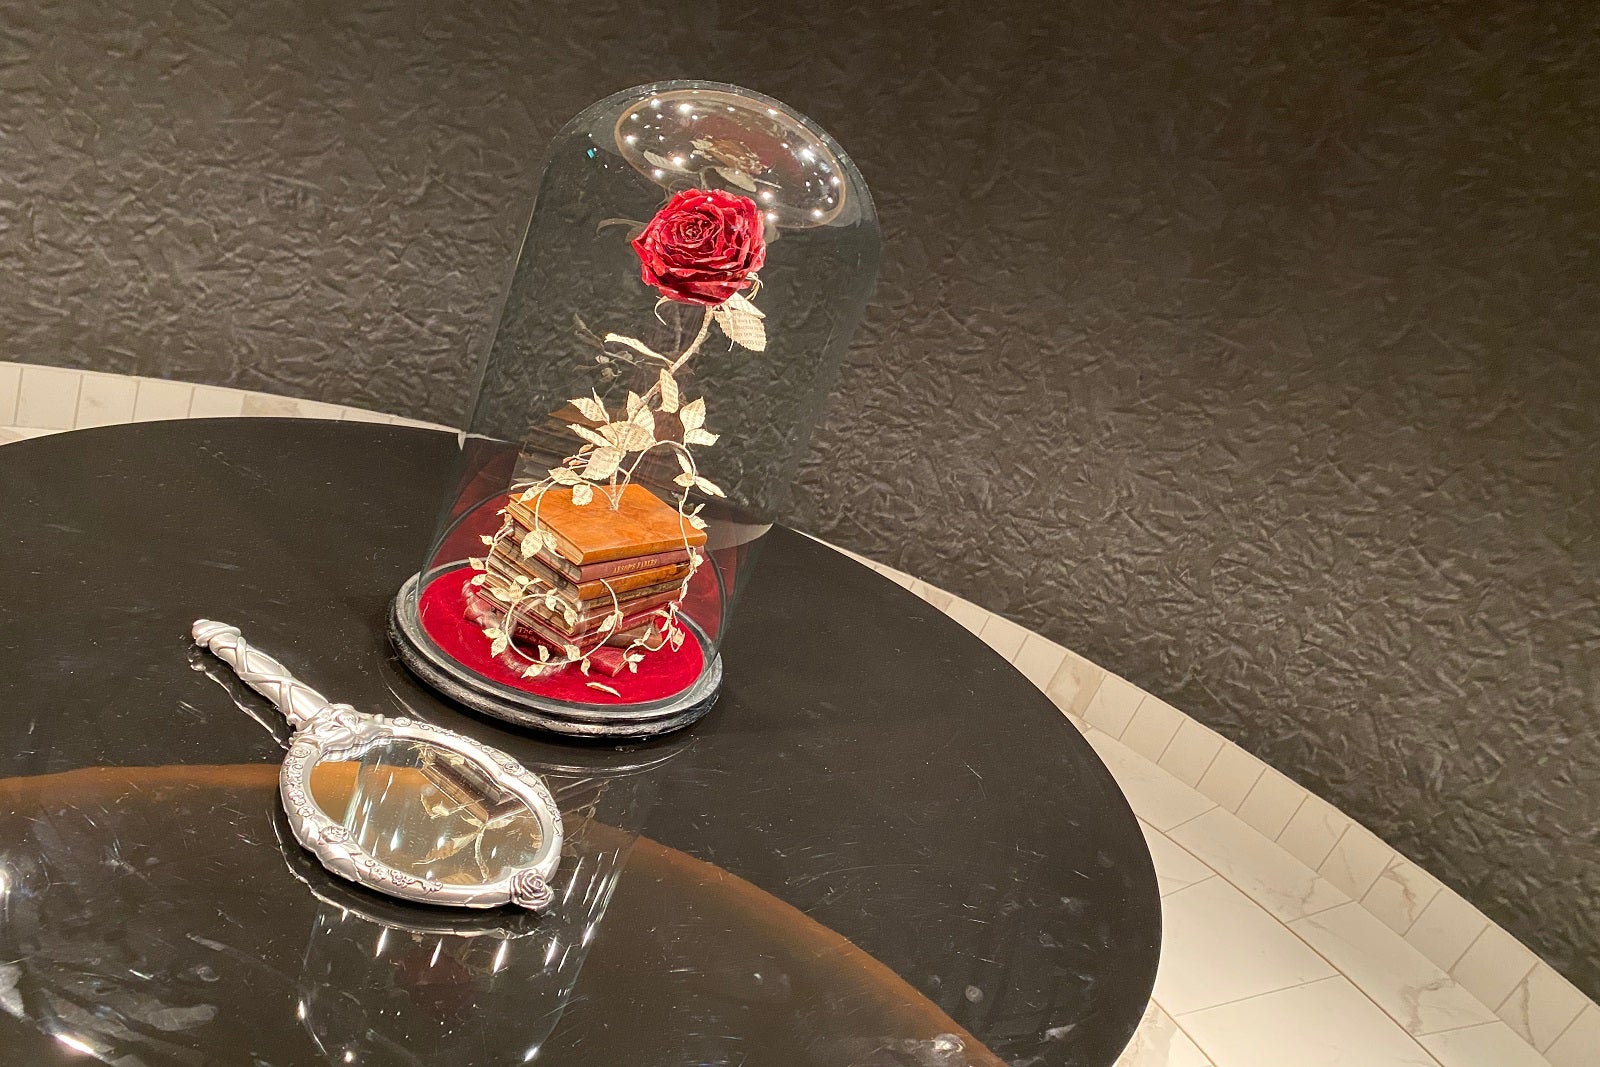 A table with a hand mirror and a glass case with a rose inside